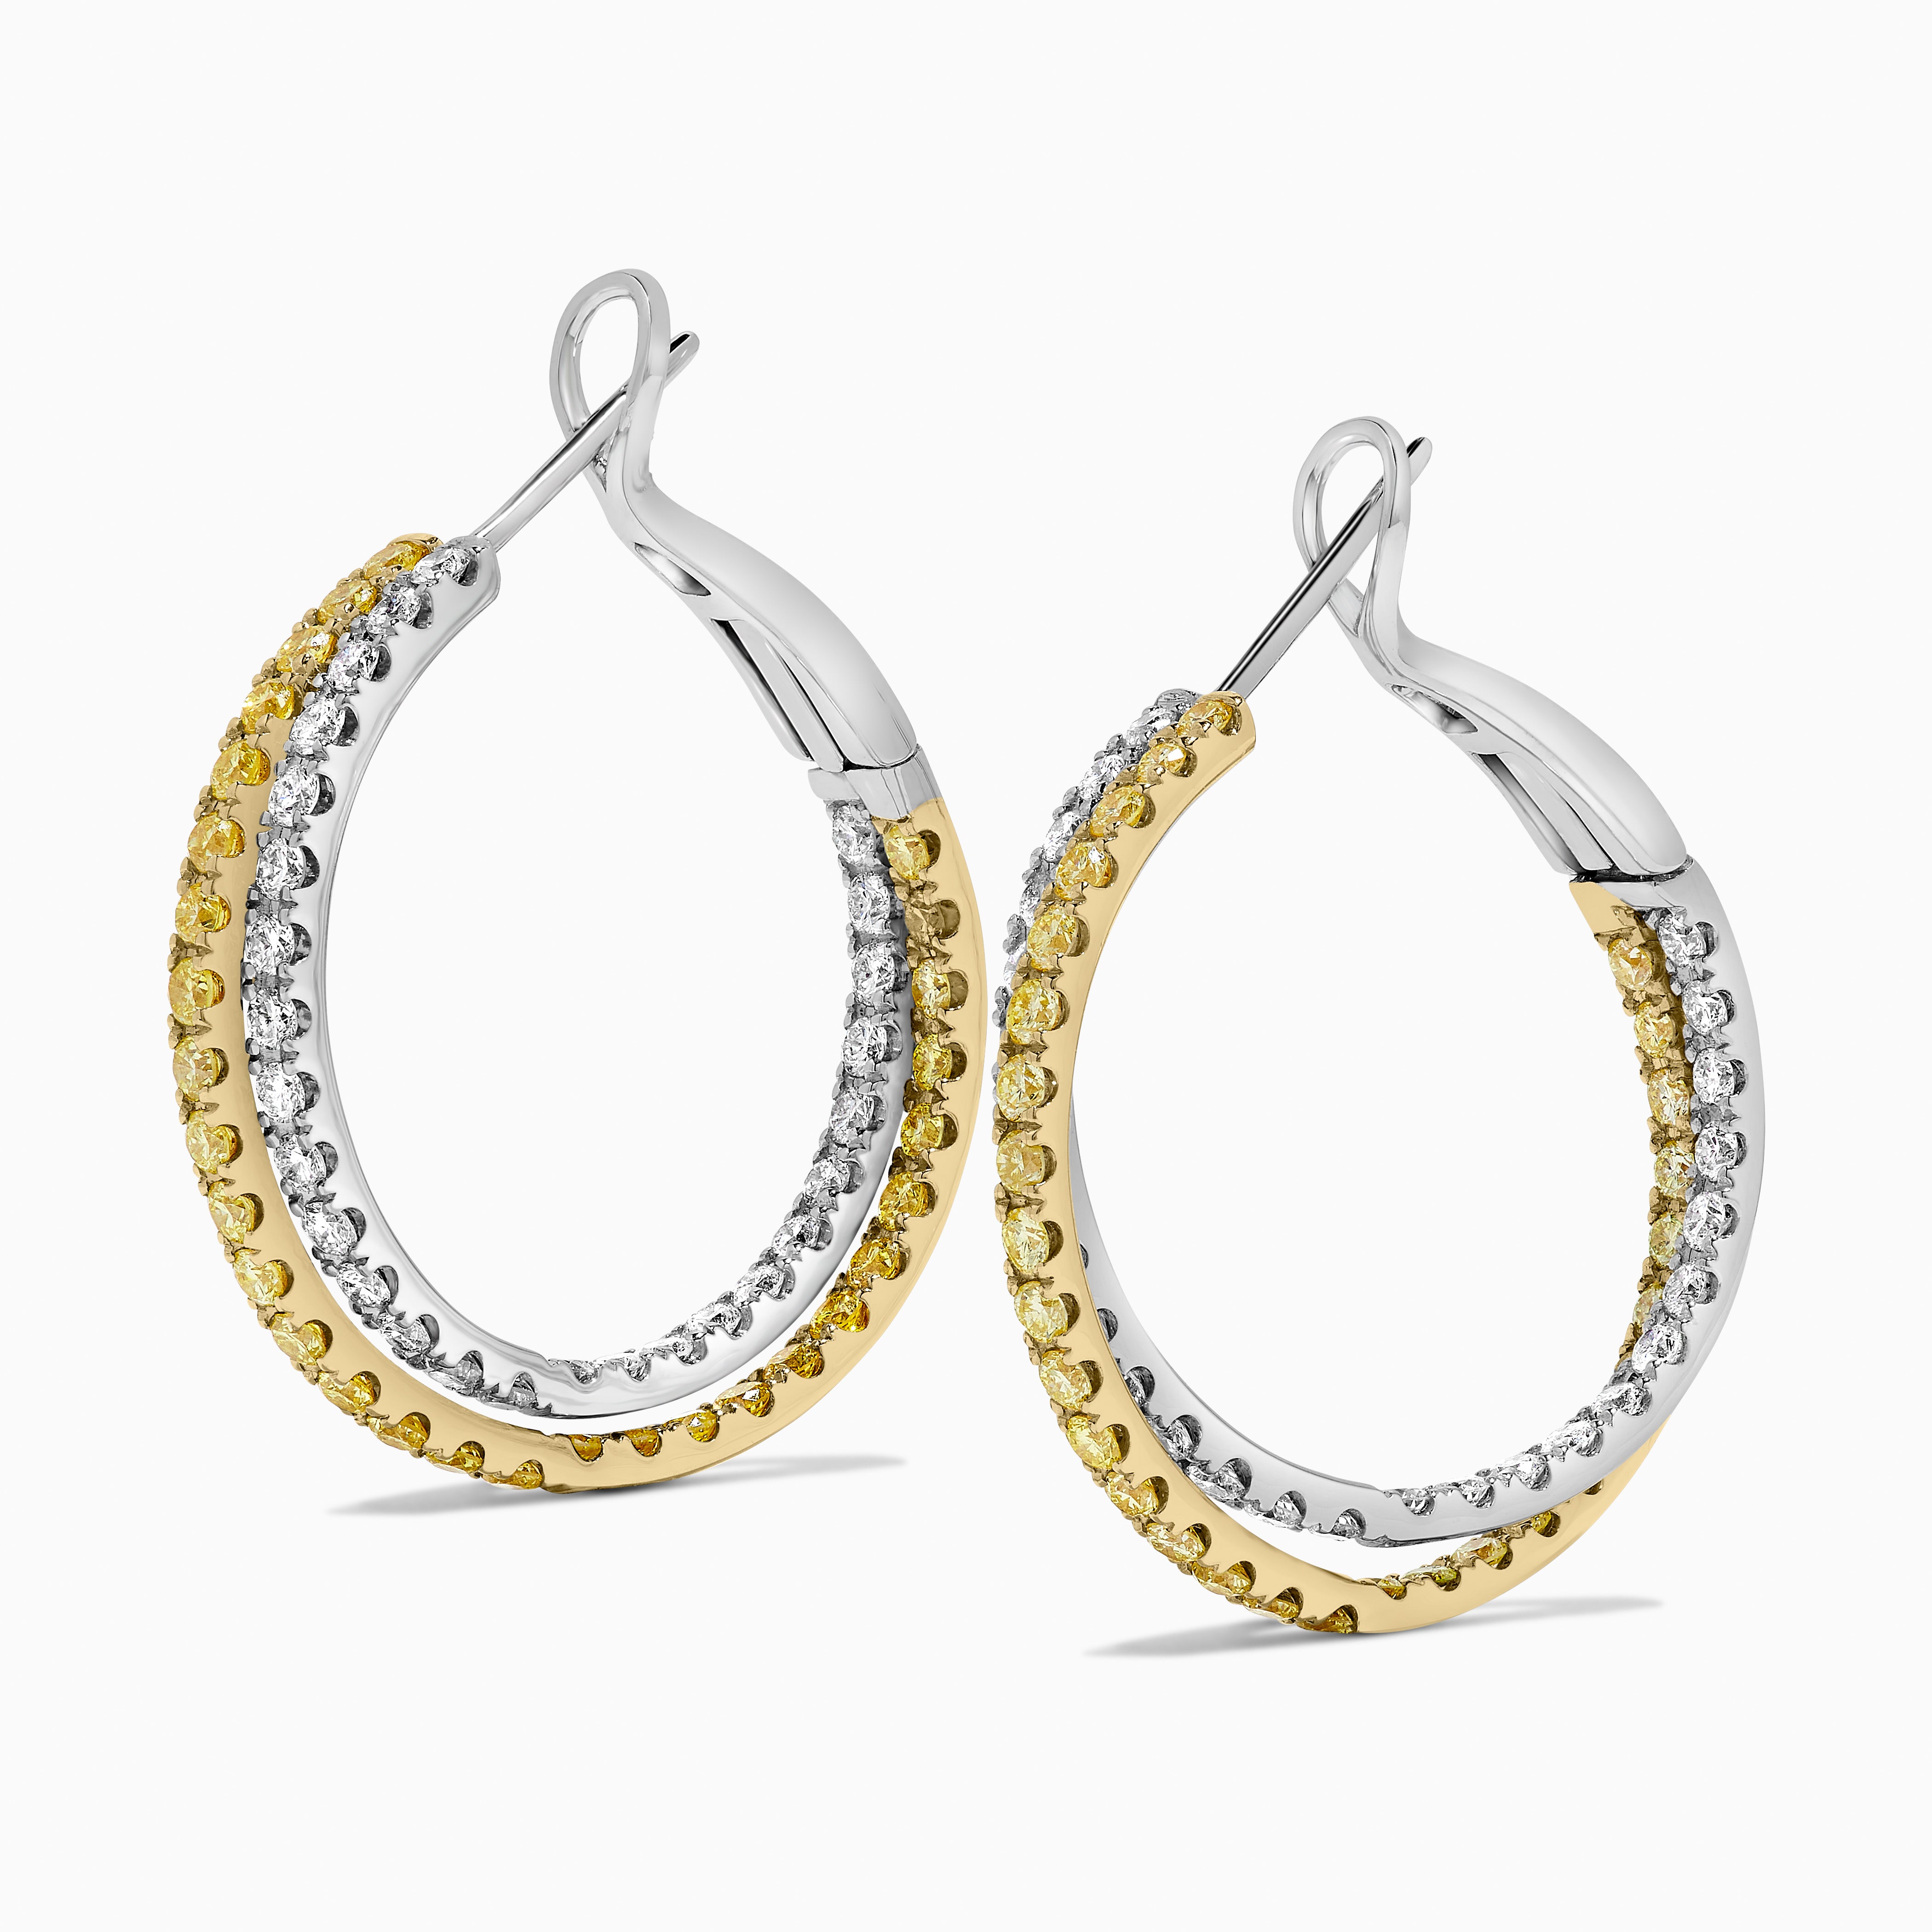 Natural Yellow Round and White Diamond 2.62 Carat TW Gold Hoop Earrings